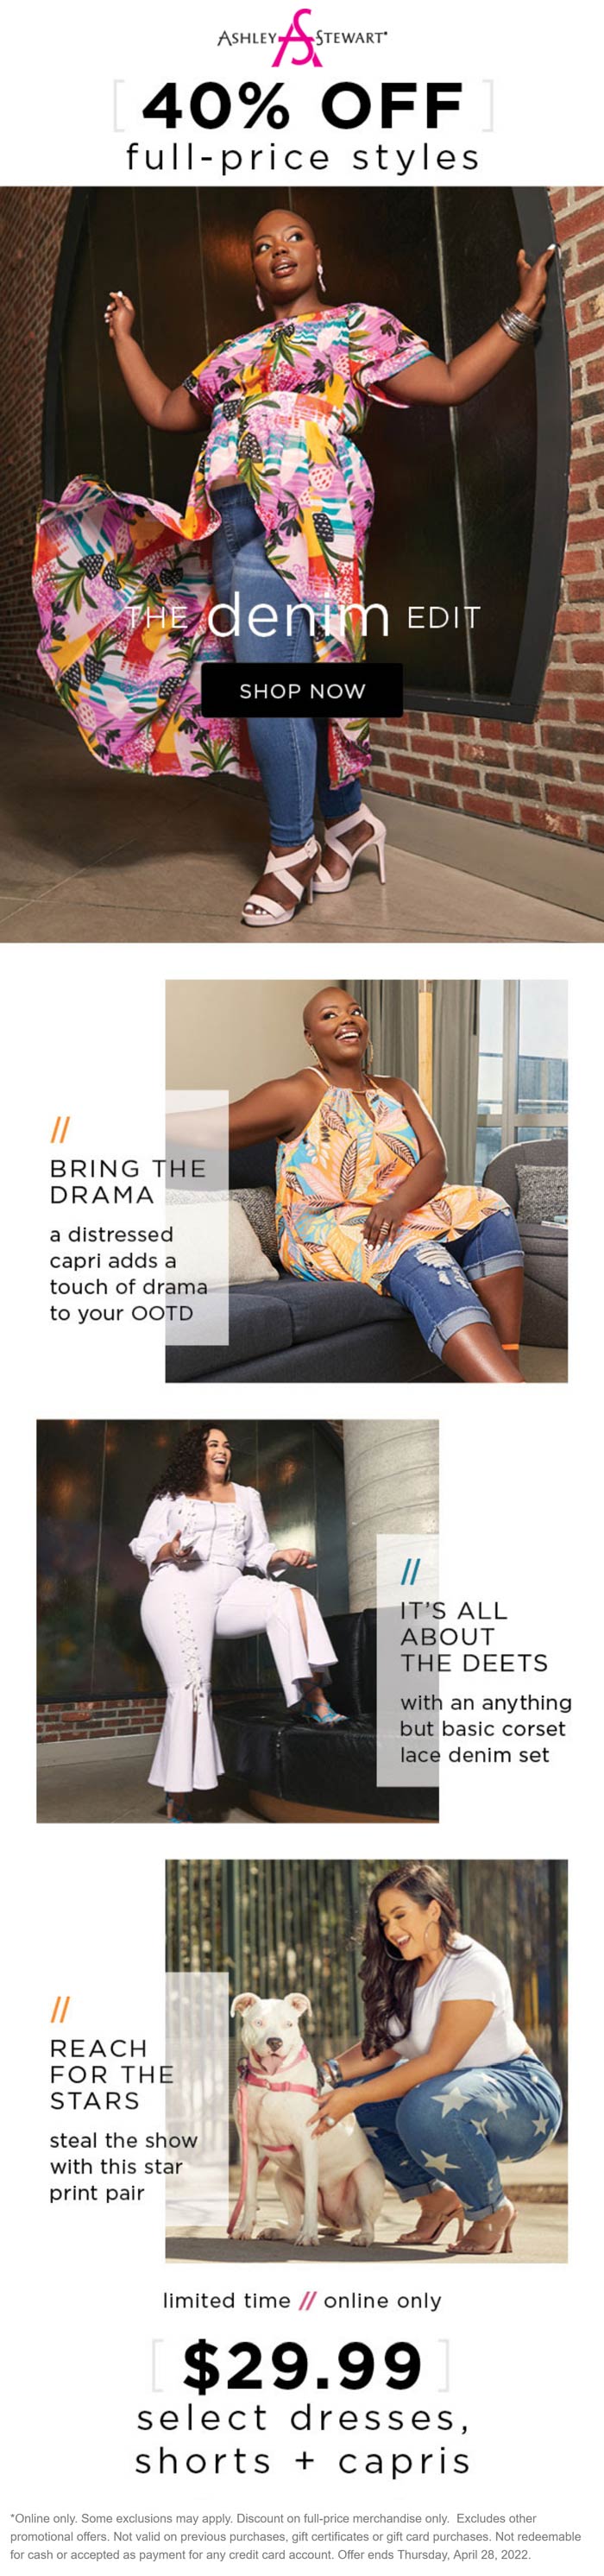 Ashley Stewart stores Coupon  40% off online today at Ashley Stewart #ashleystewart 